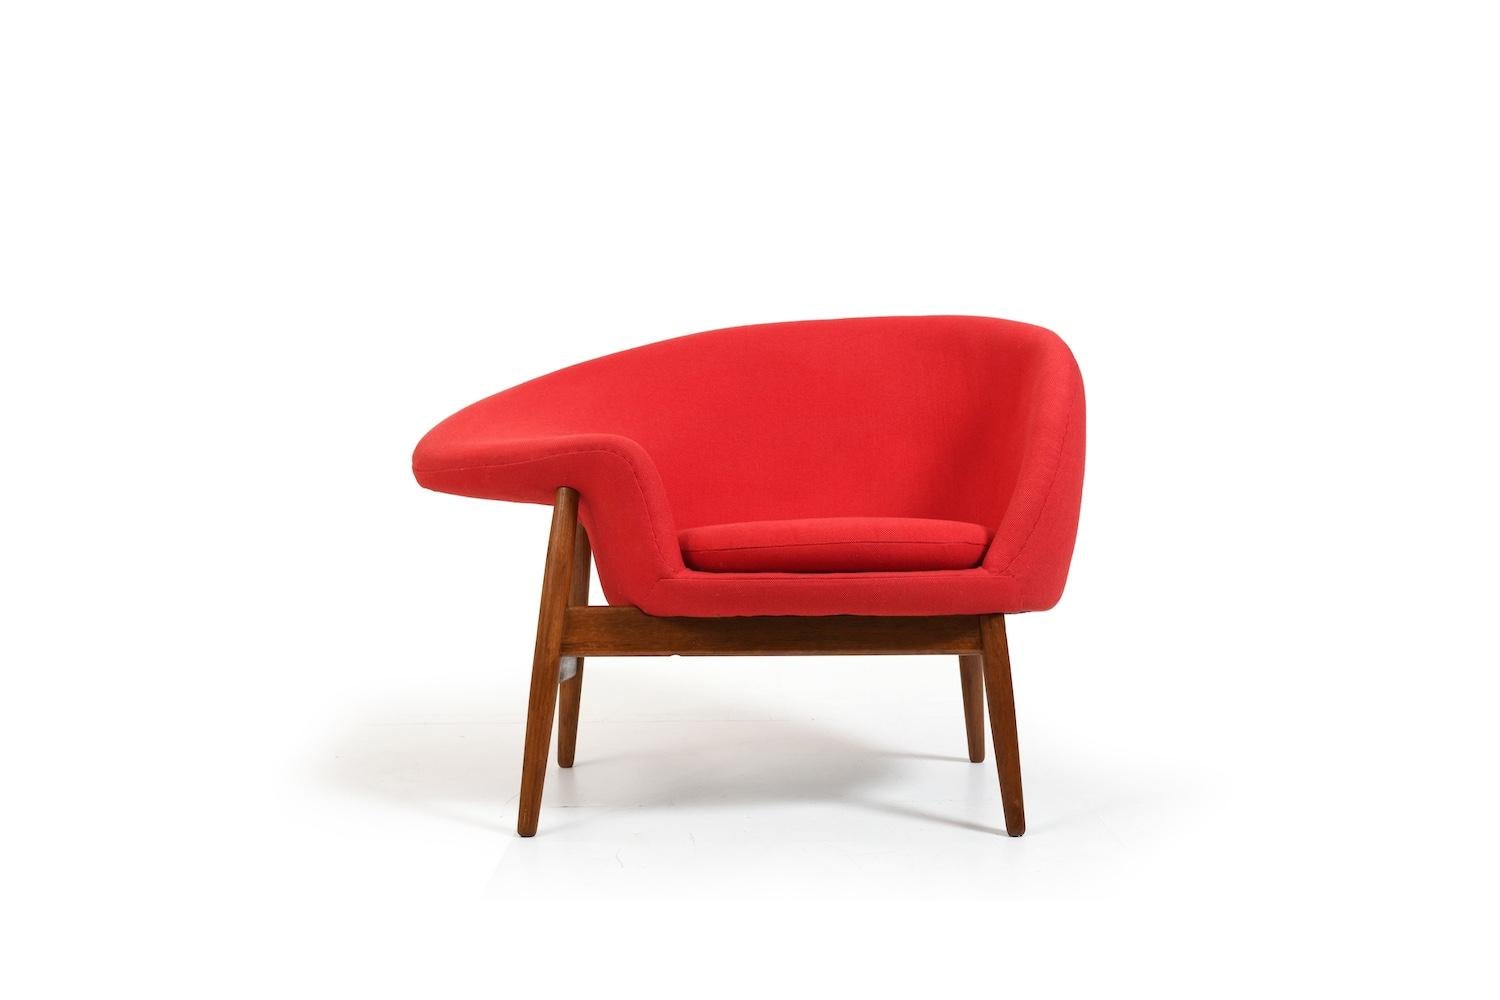 Old FRied Egg easychai by Hans Olsen for Bramin Denmark 1956. Produced 1950s in solid teak. Old versiion with screws. Later reupholstered in a red wool fabric from Kvadrat. This work was carried out by the renowned Danish upholsterer Knud B.